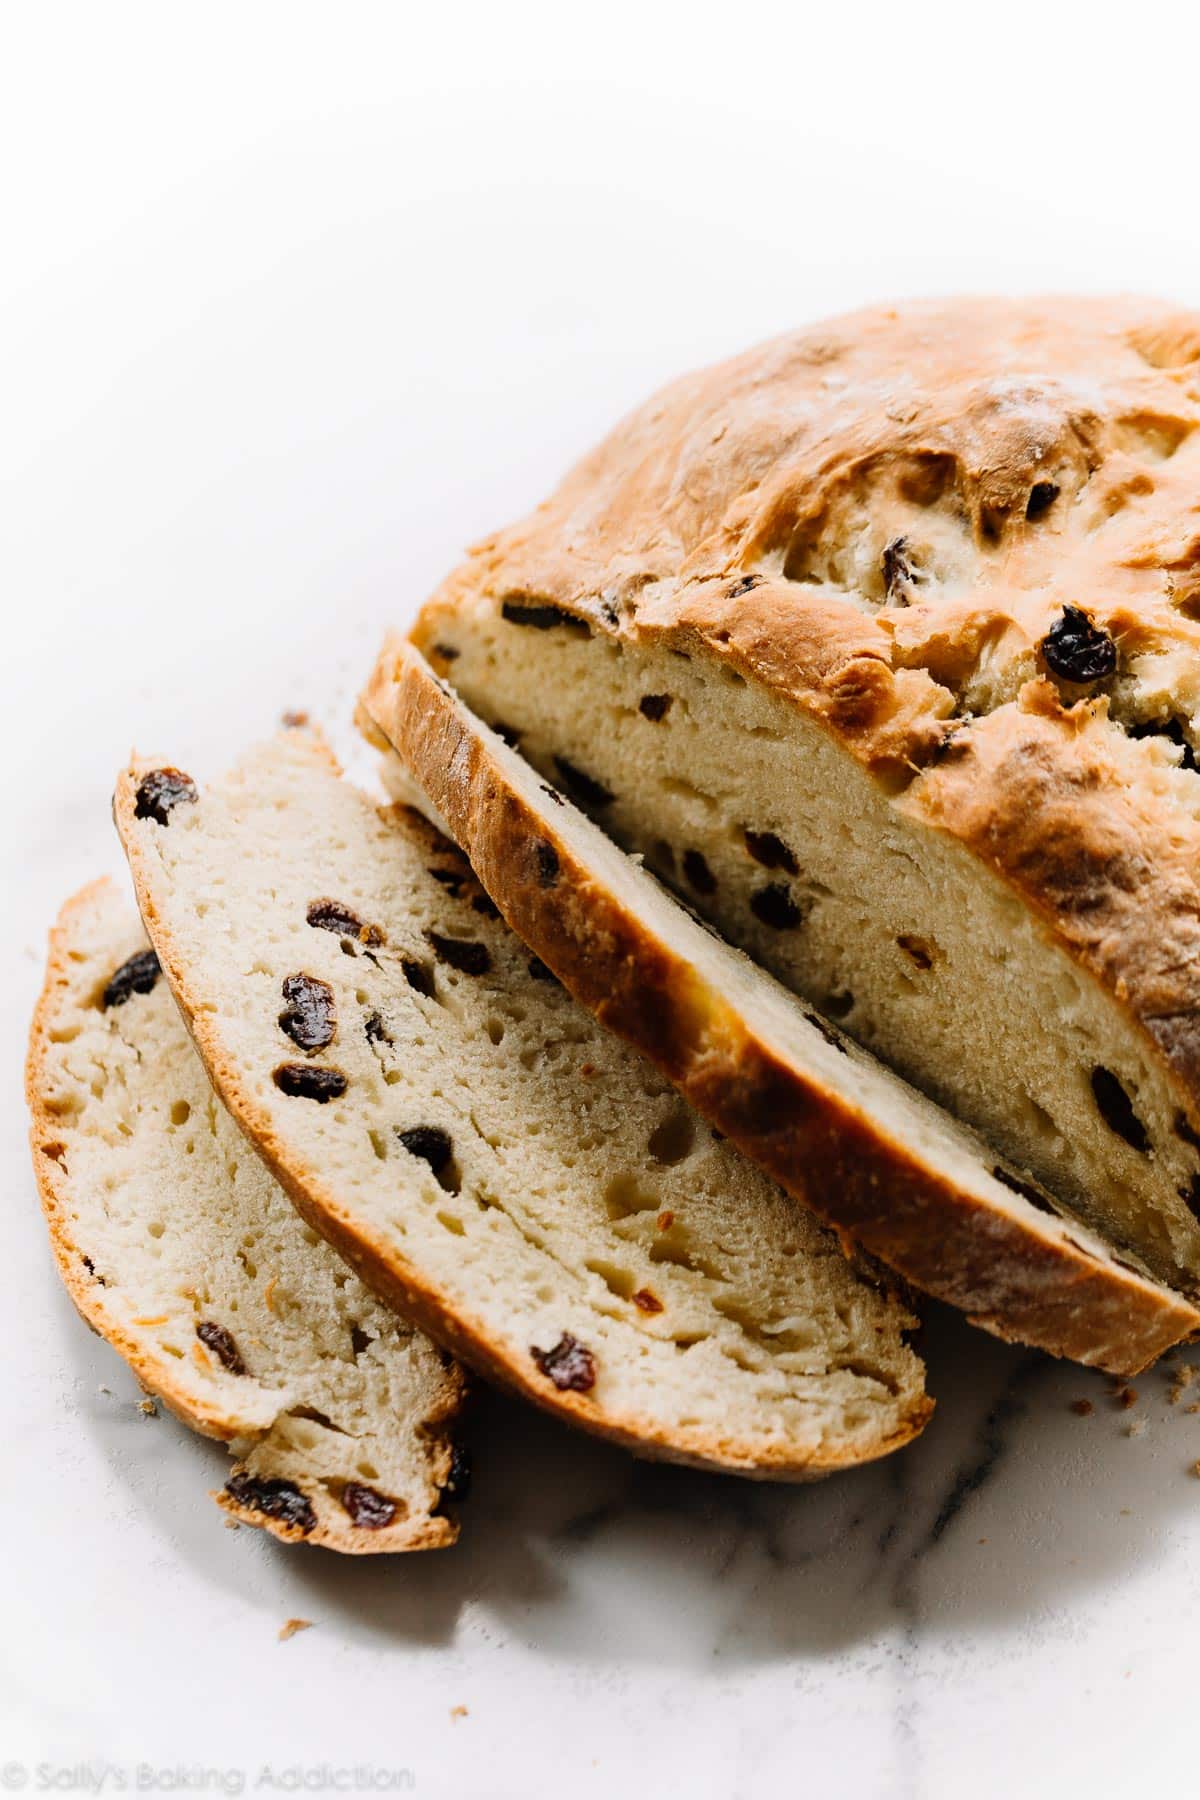 A color photo of a partially sliced loaf of Irish soda bread.